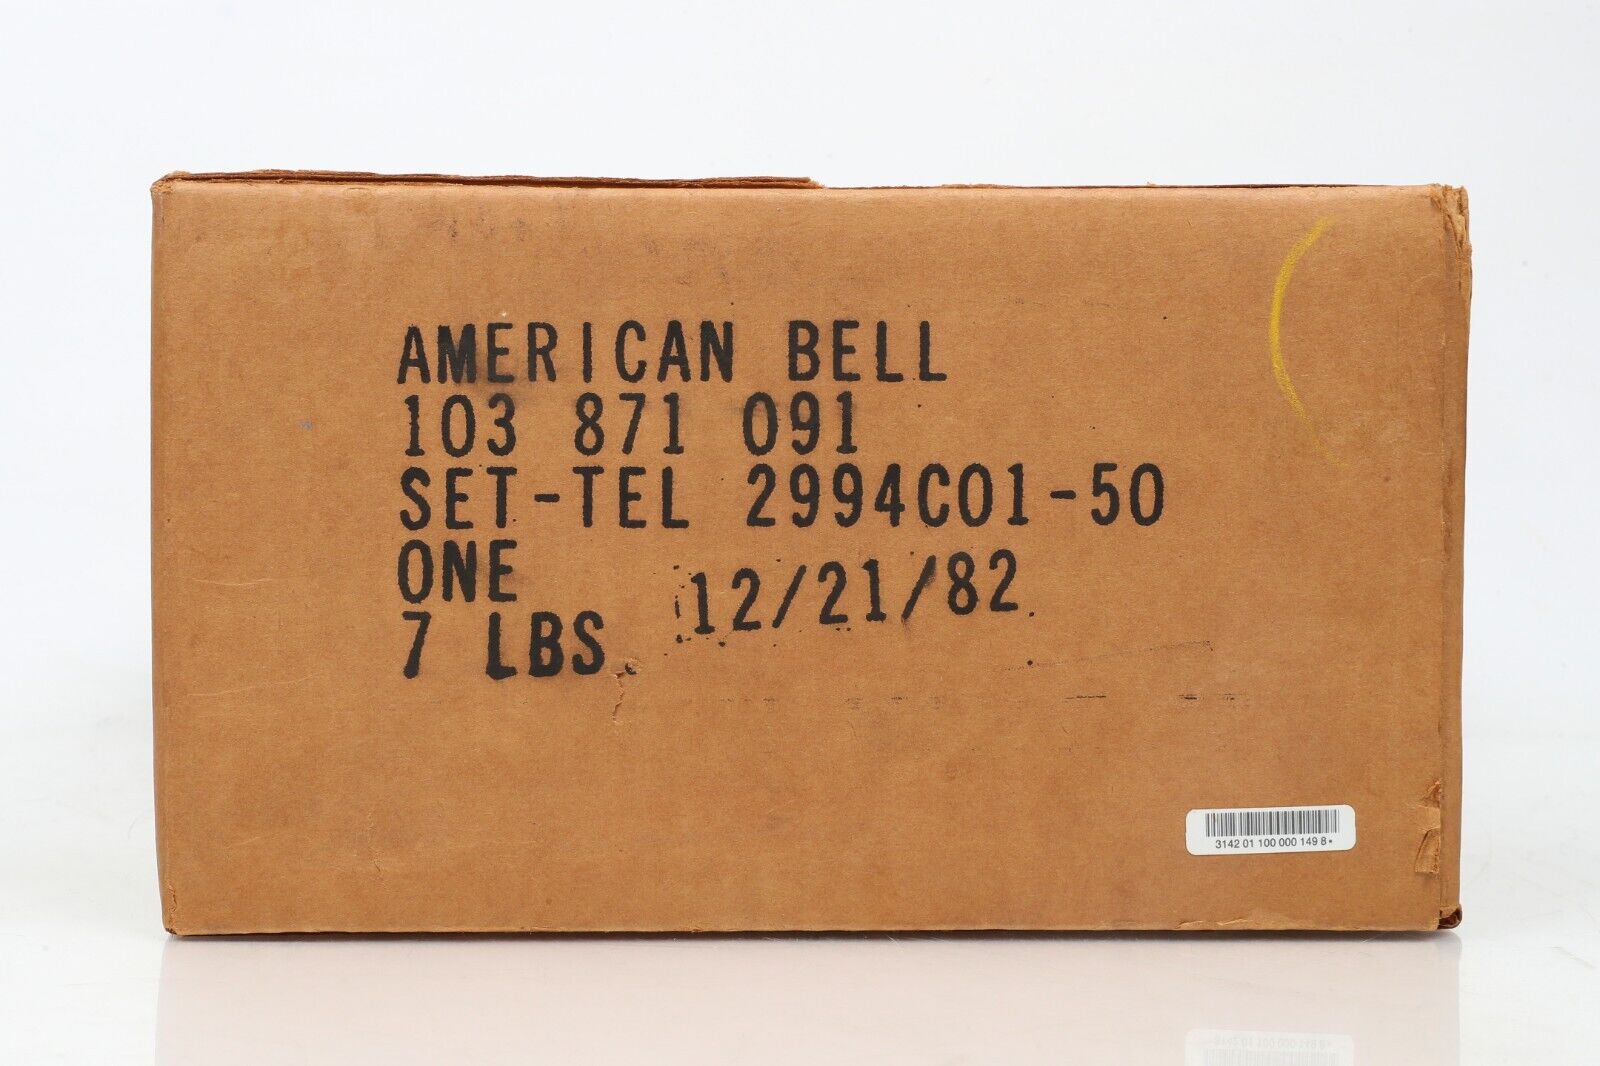 NOS SEALED WESTERN ELECTRIC BELL SYSTEM 2994 C01-50 ,103 871 091